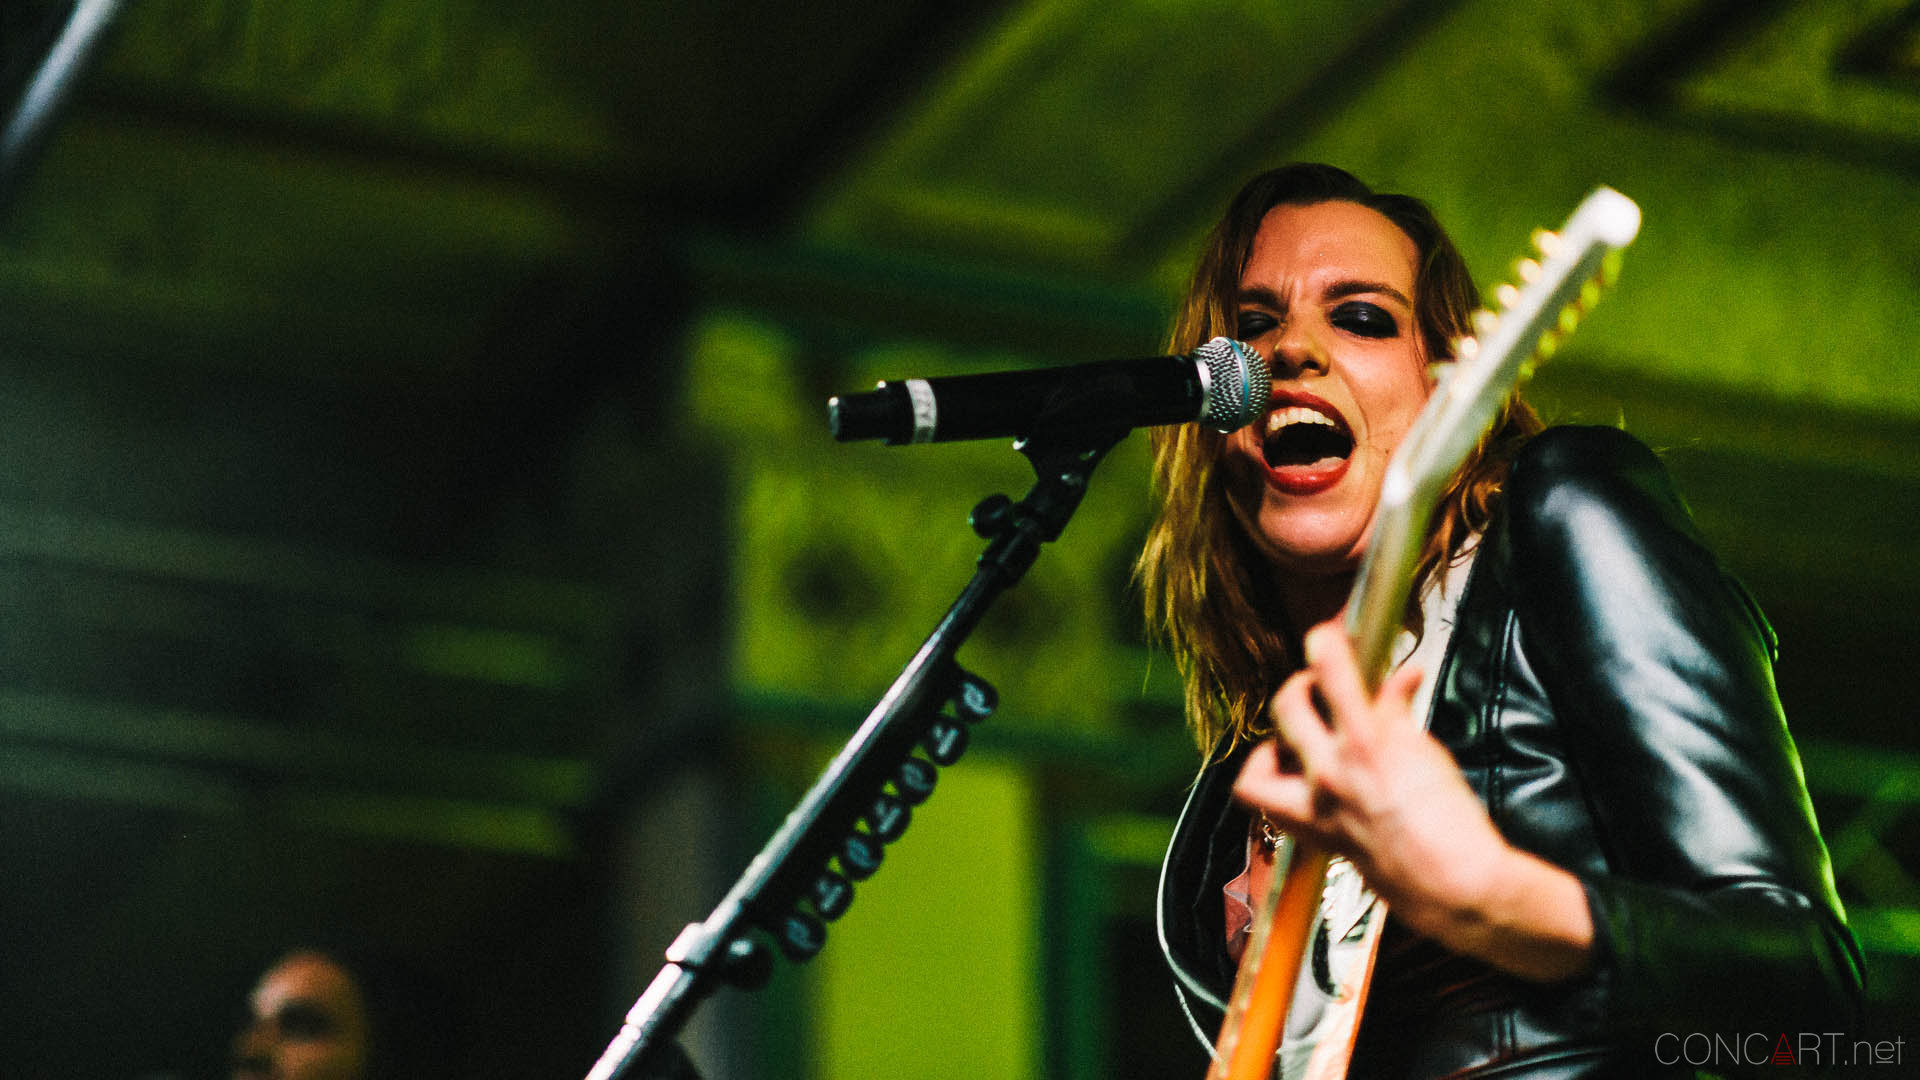 1920x1080 Concert Photos: Halestorm @ Deluxe at Old National Centre — Indianapolis  2013 | conc.art | The Art of Live